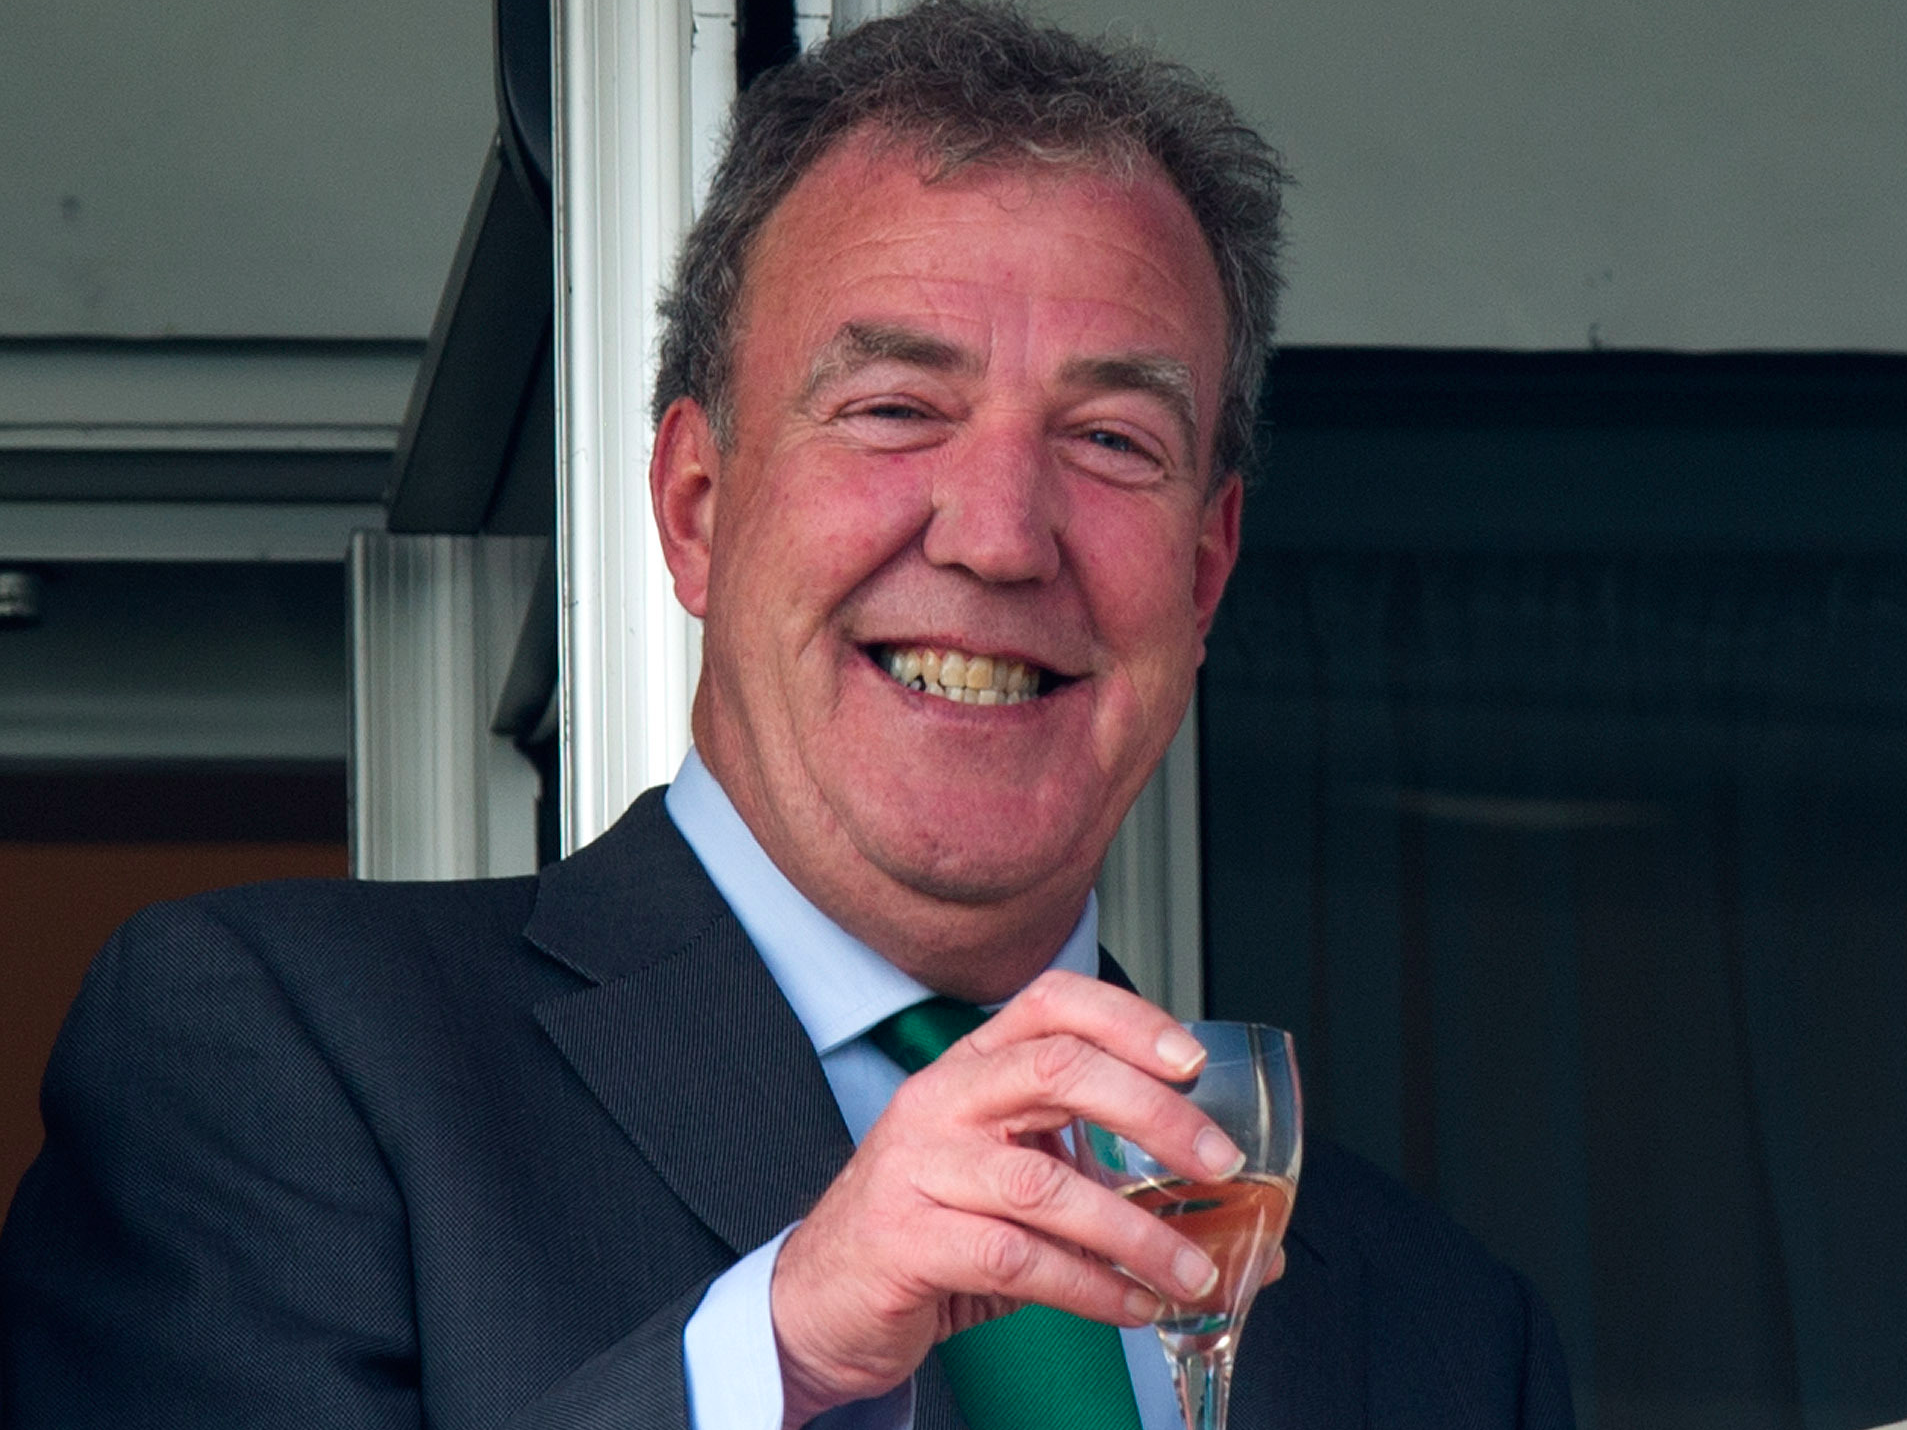 jeremy-clarkson-gave-up-booze-to-stay-sharp-while-negotiating-his-amazon-prime-deal.jpg